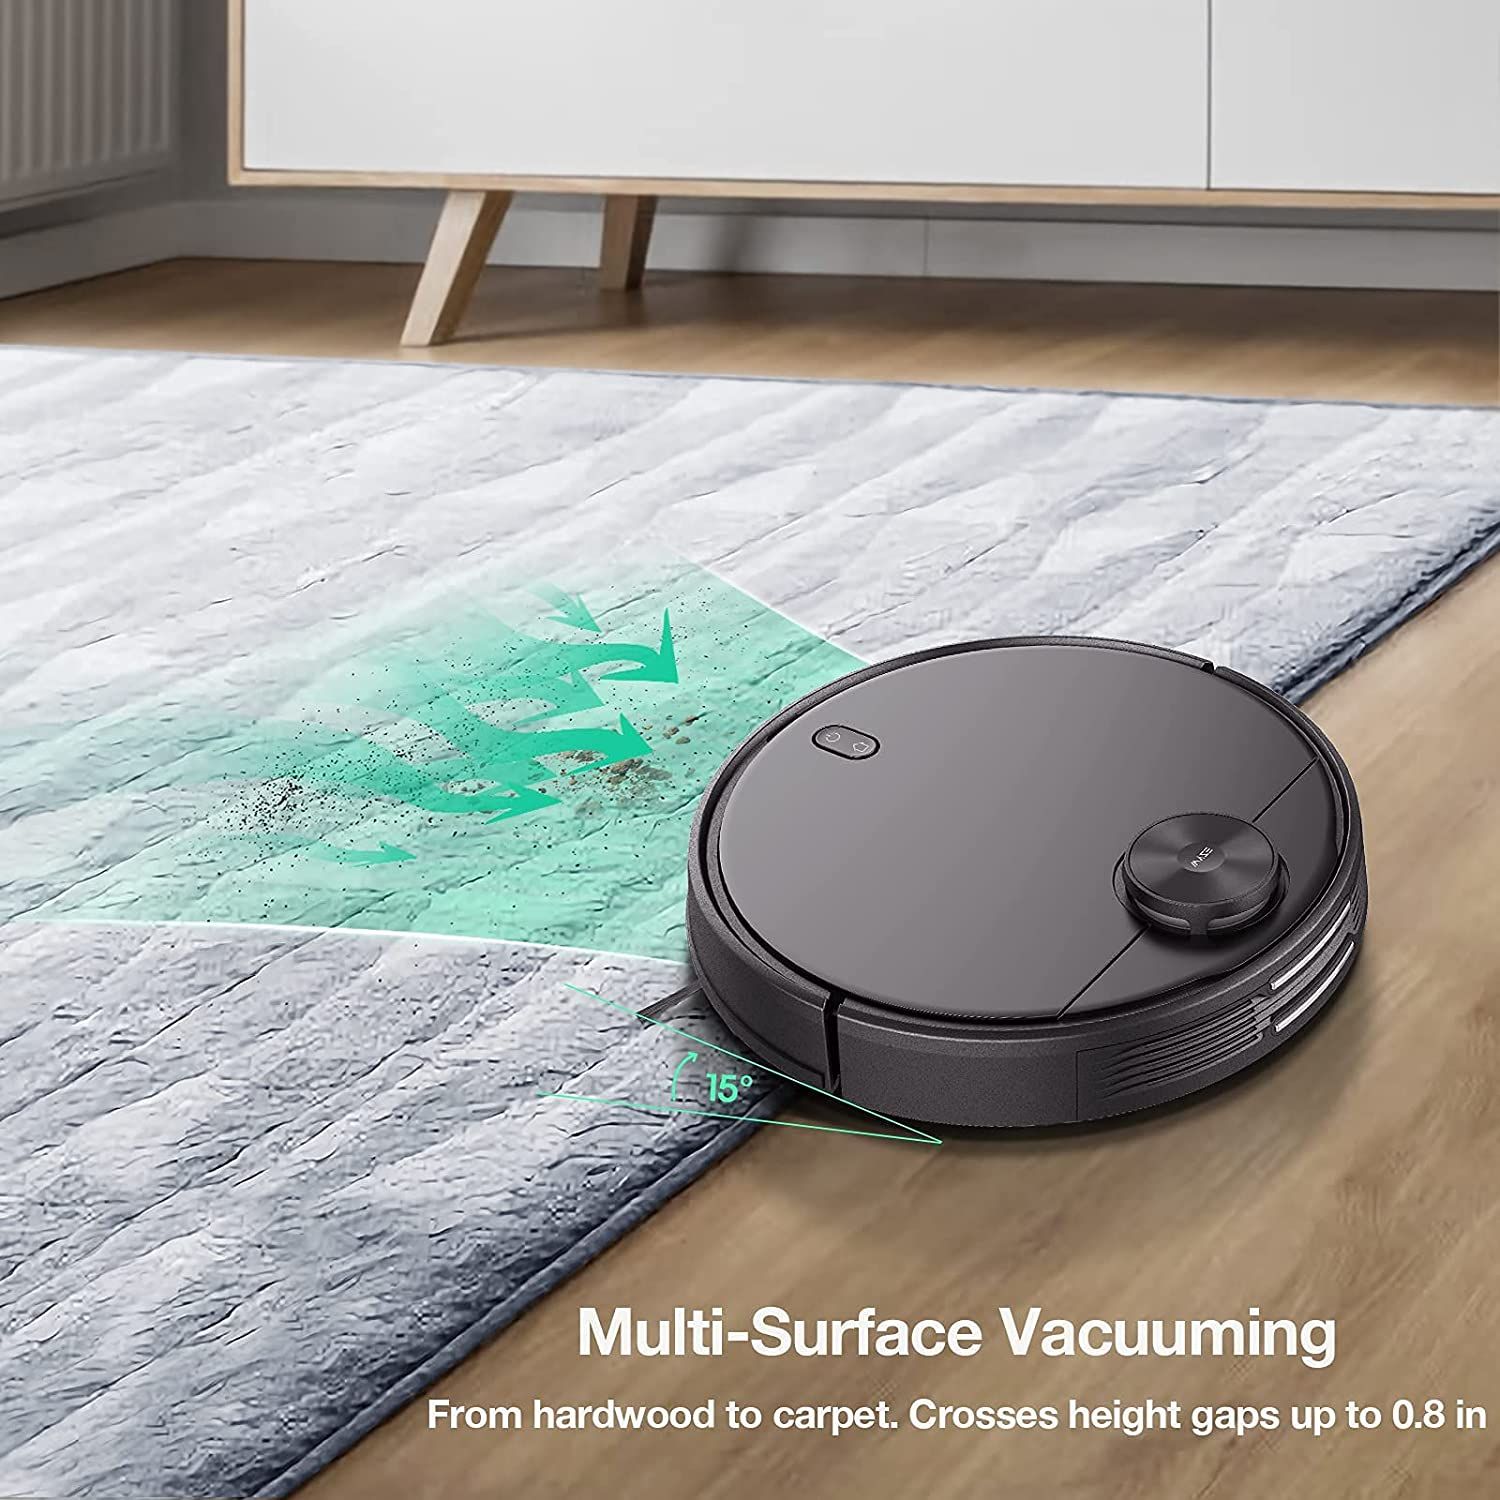 Wyze Robot Vacuum multi surface cleaning